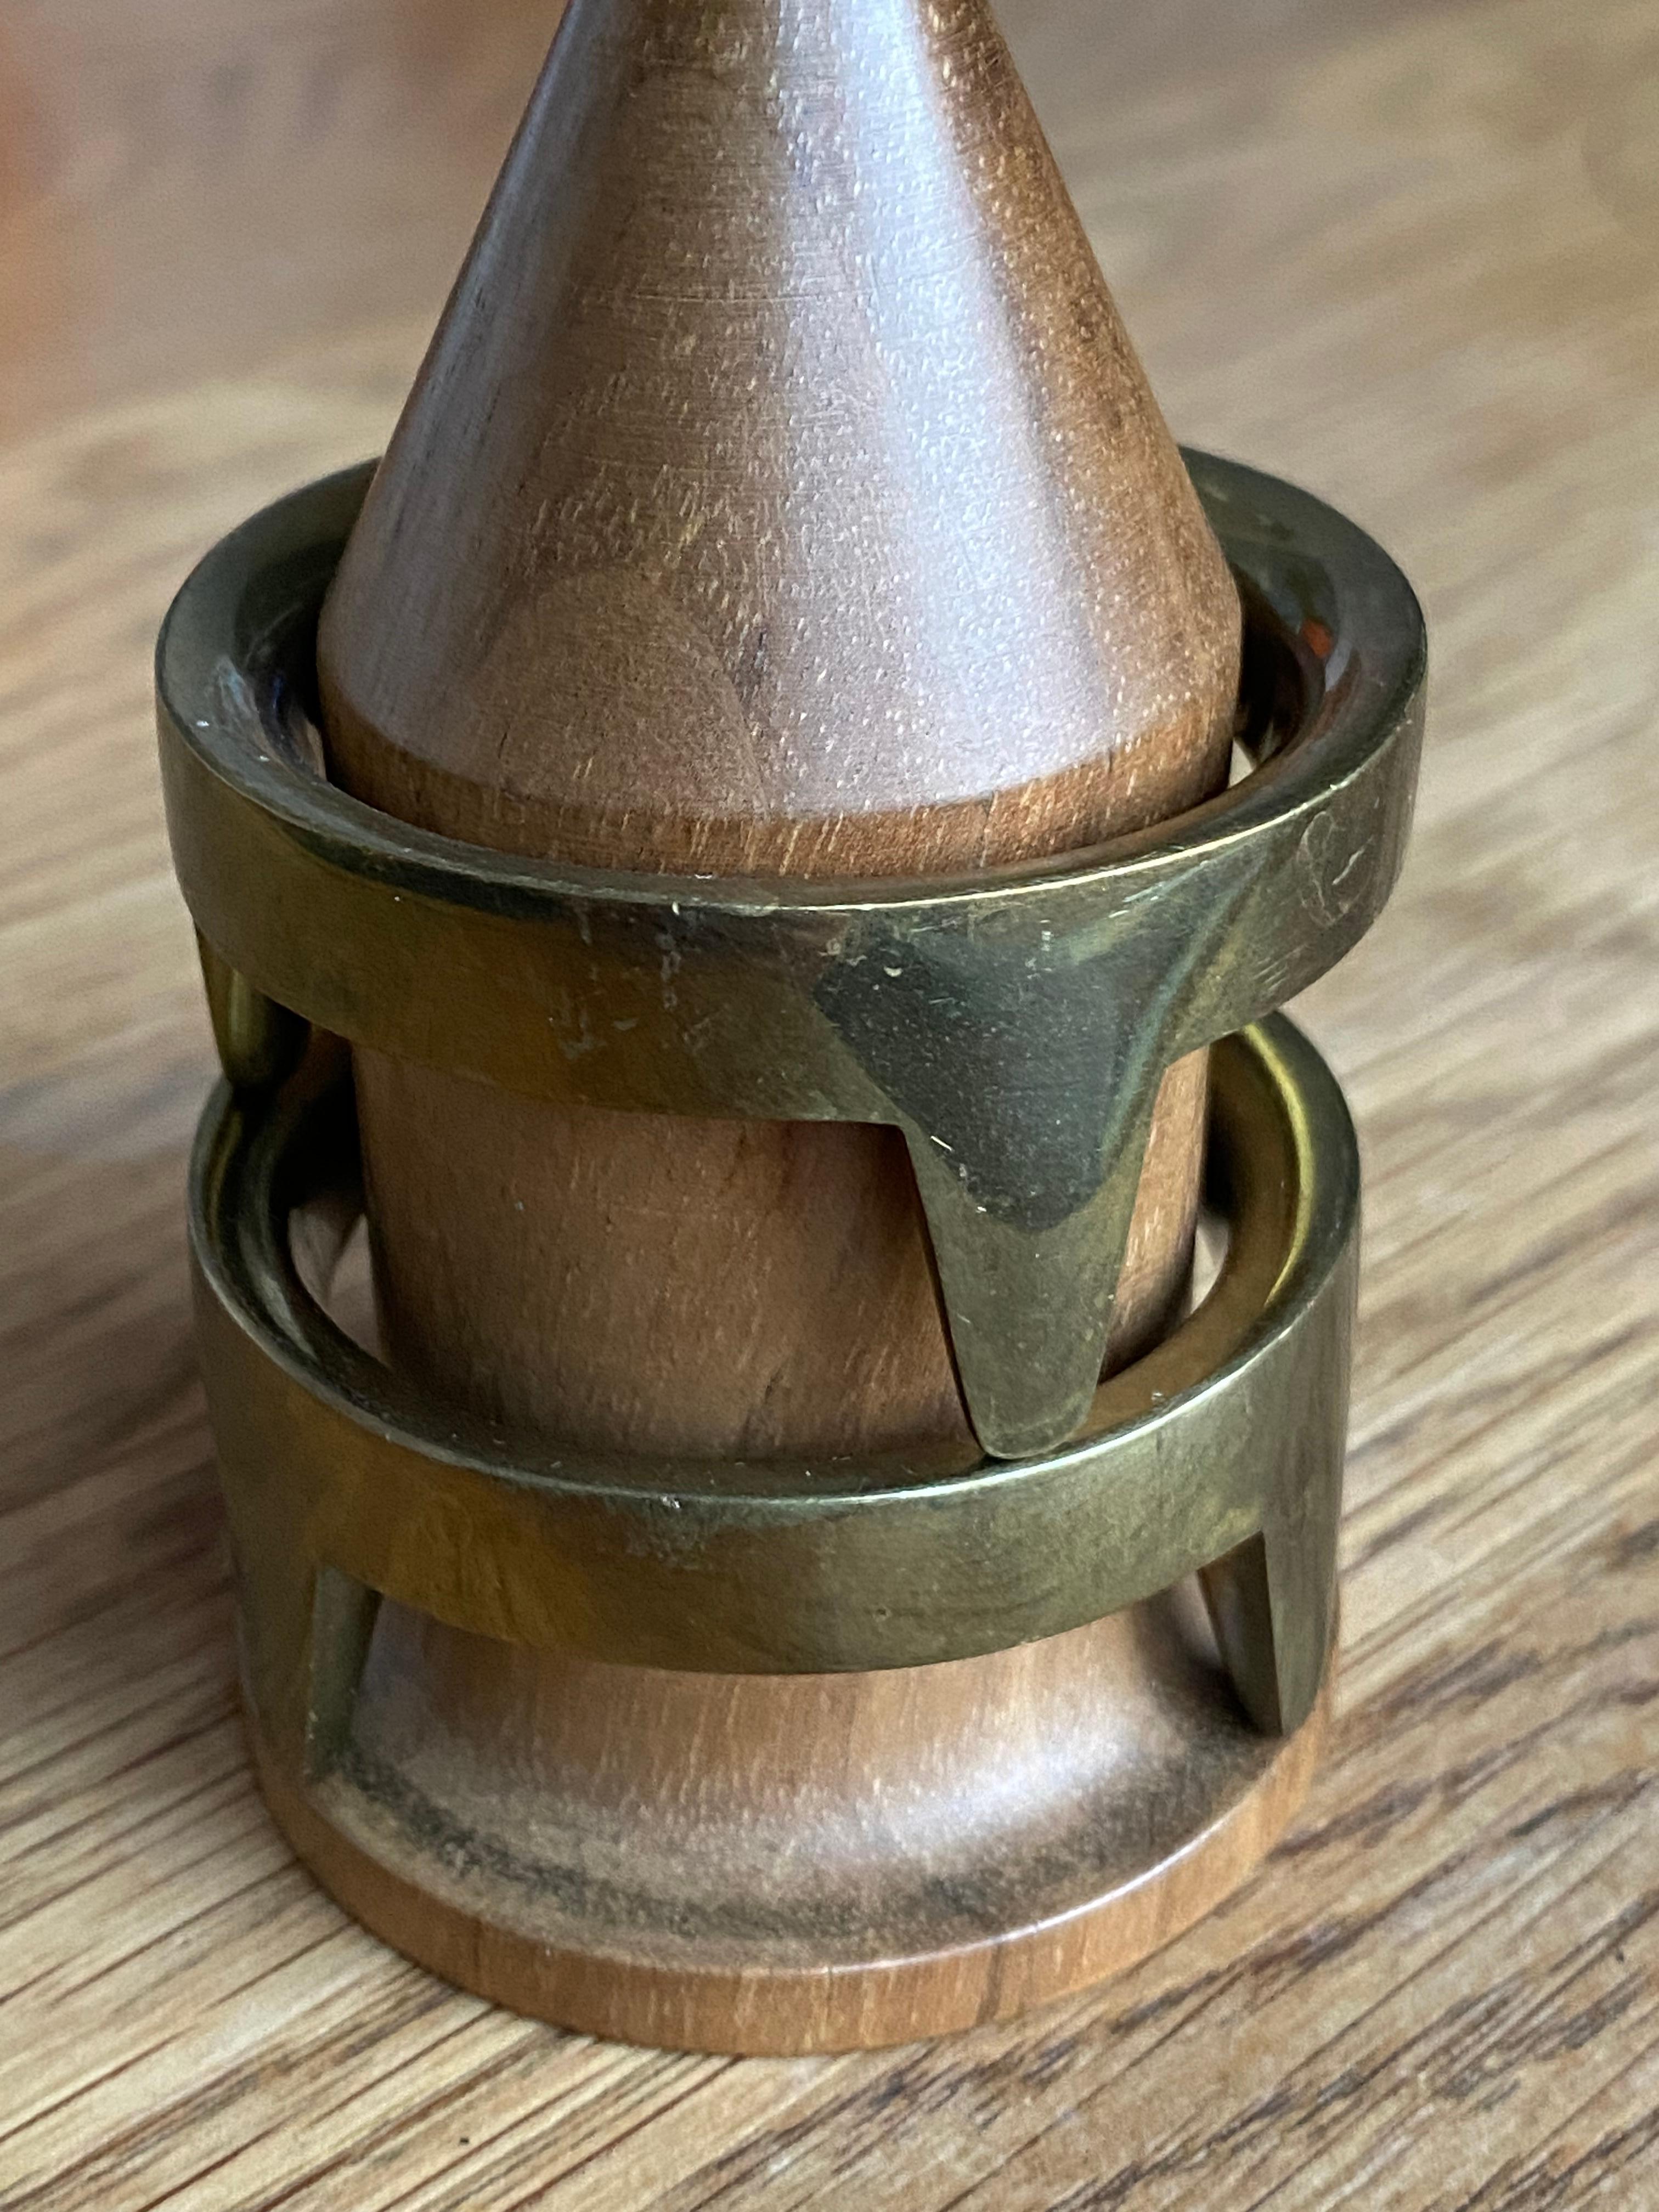 A set of 2 egg cups, on a bechwood holder, a very characteristic design by the Auböck workshop, Vienna, Austria. Original production from the 1950‘s. Excellent condition.

The 2 massive brass rings with beautiful patina but can be